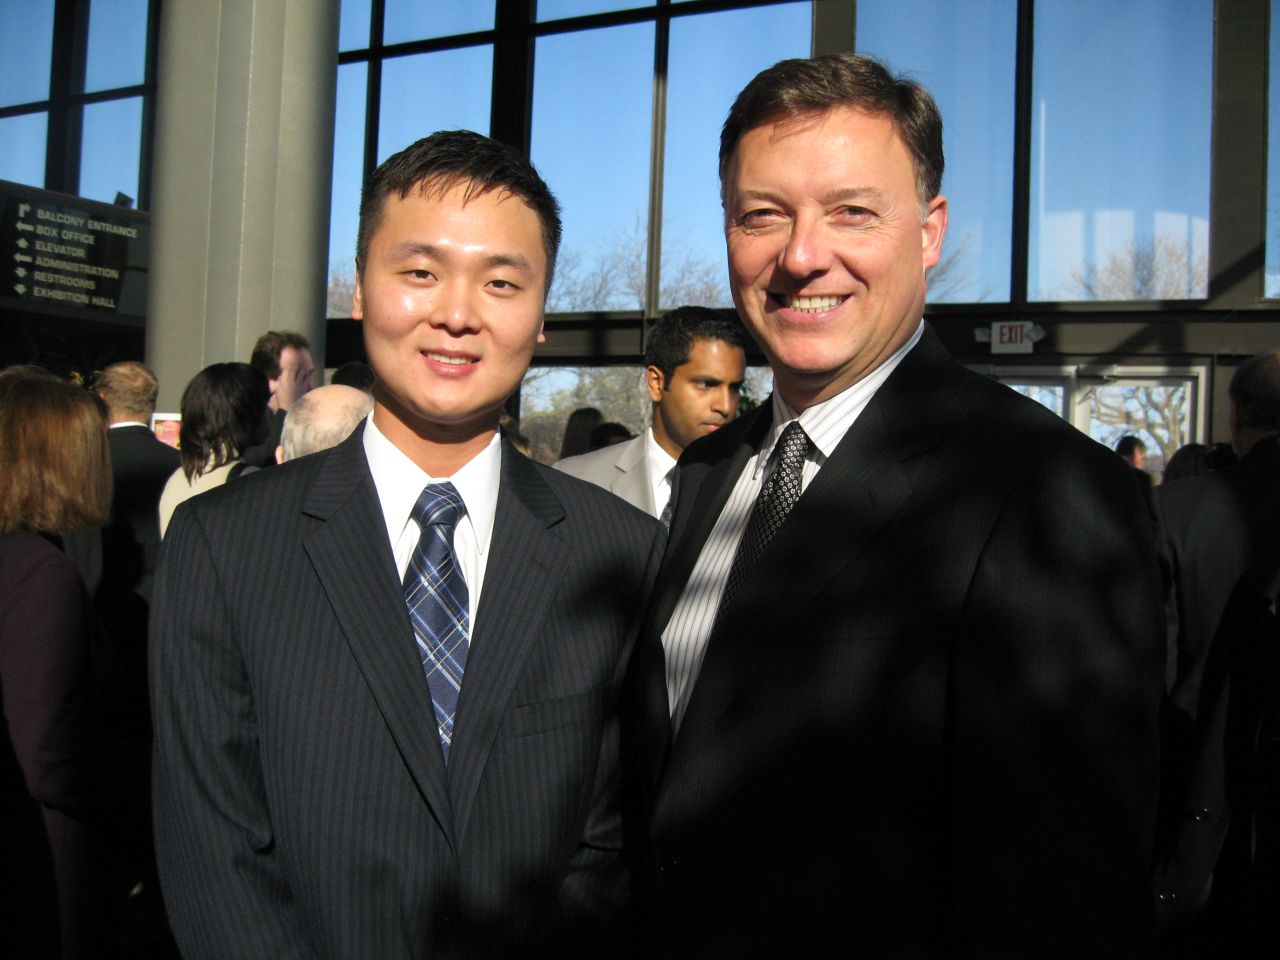 ISBA 2nd Vice President John Locallo with new admittee Paul Lee of Naperville